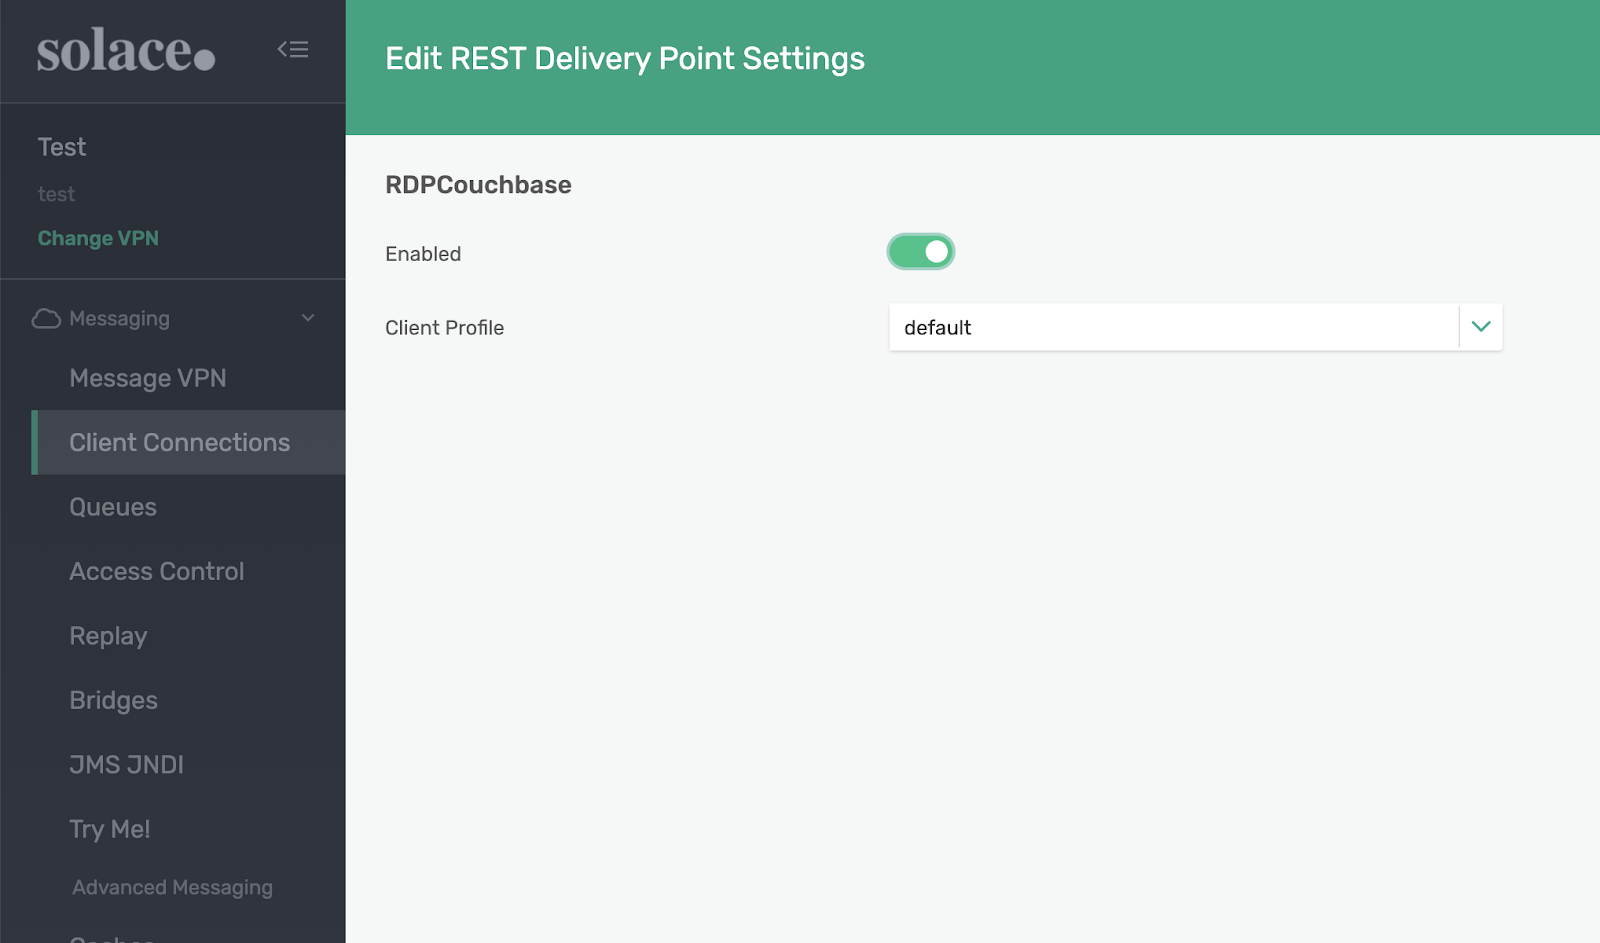 Edit REST Delivery Endpoint